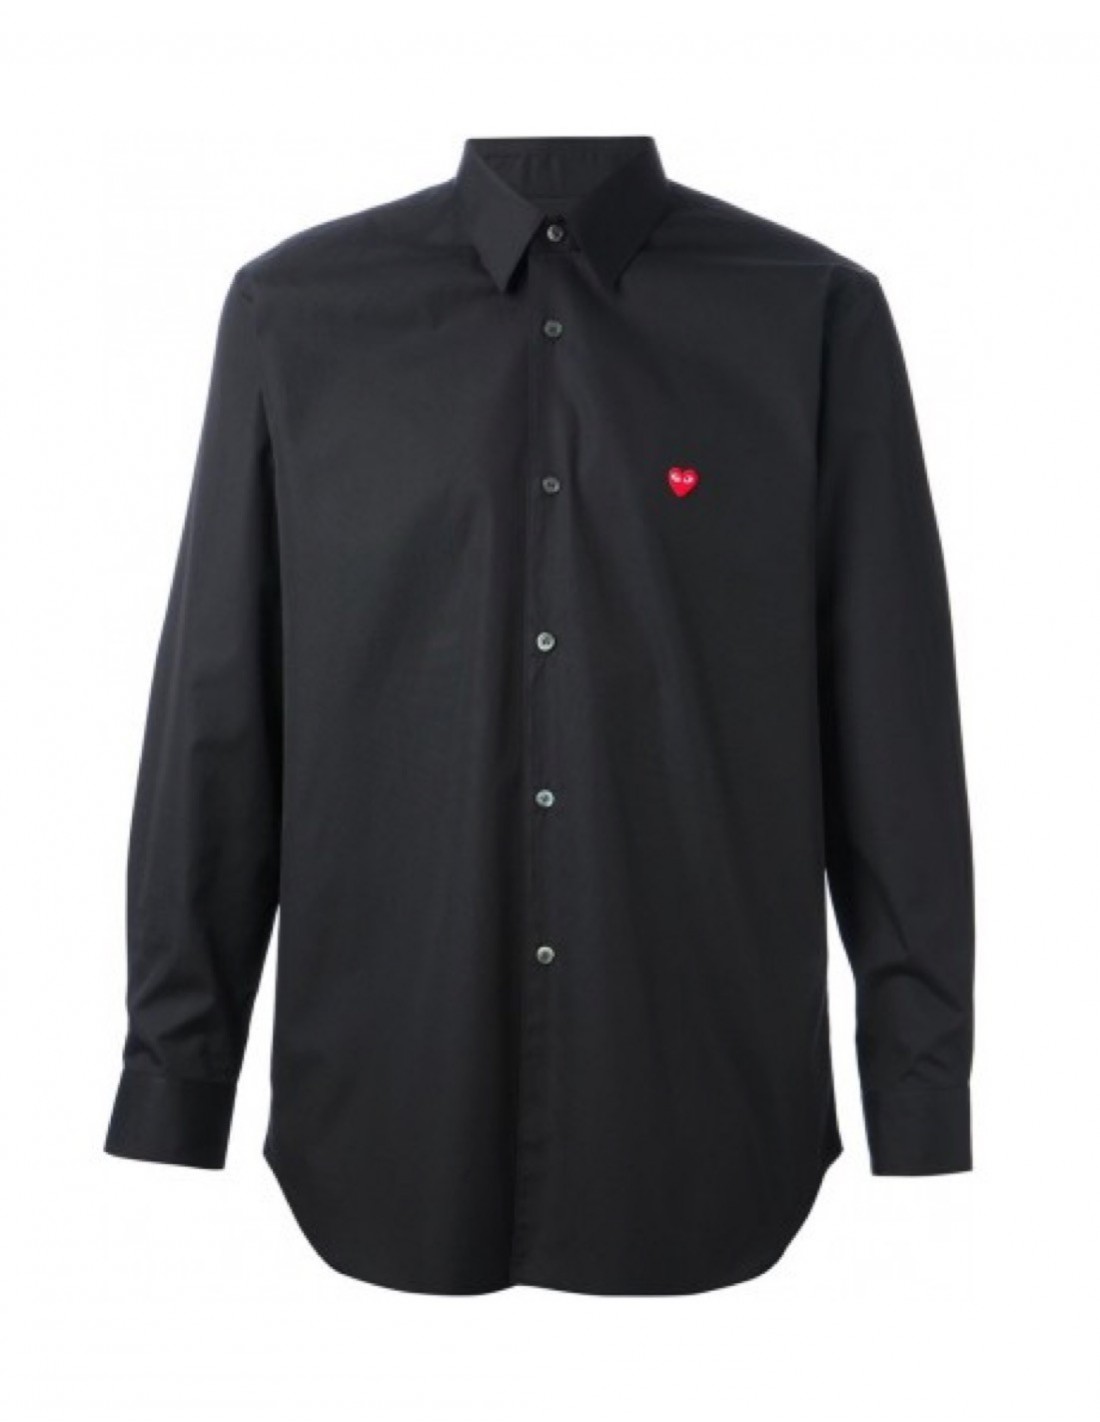 comme des garcons black shirt with red heart